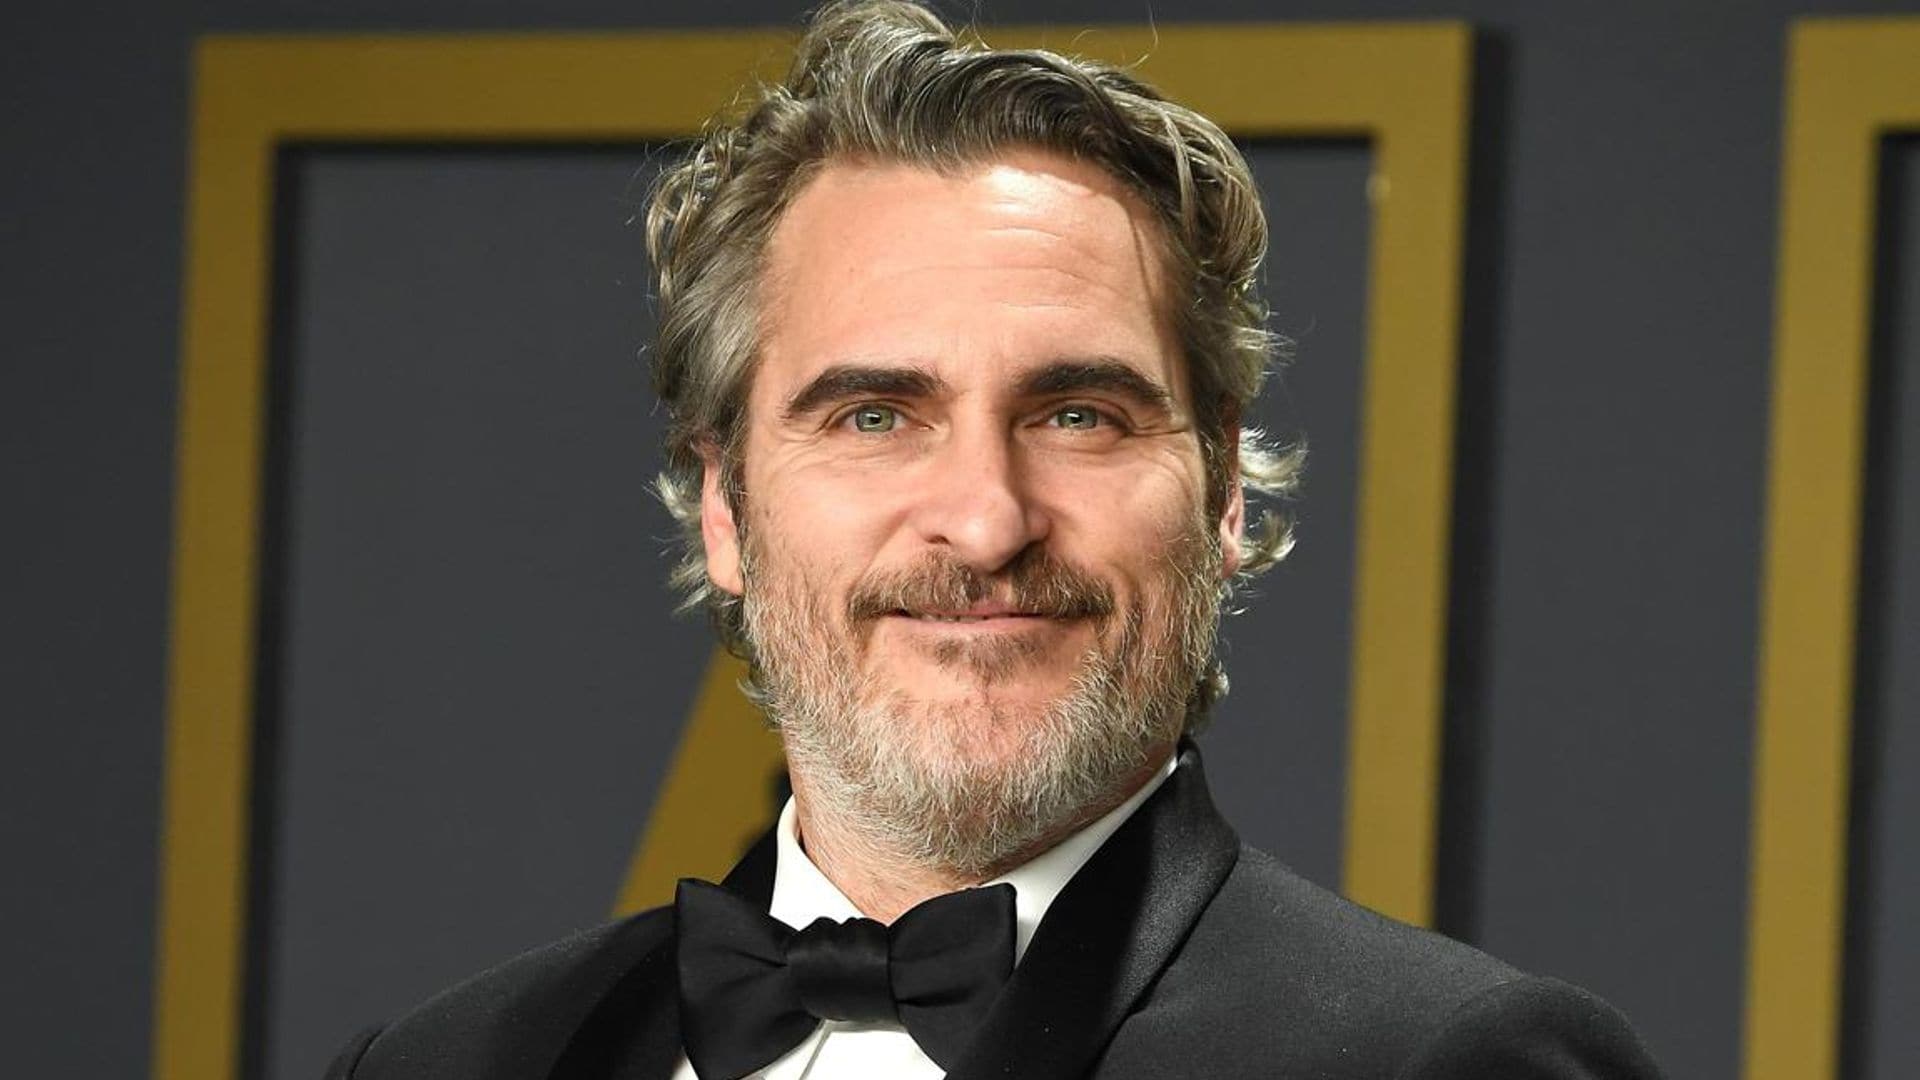 Joaquin Phoenix is turning heads with his new iconic role